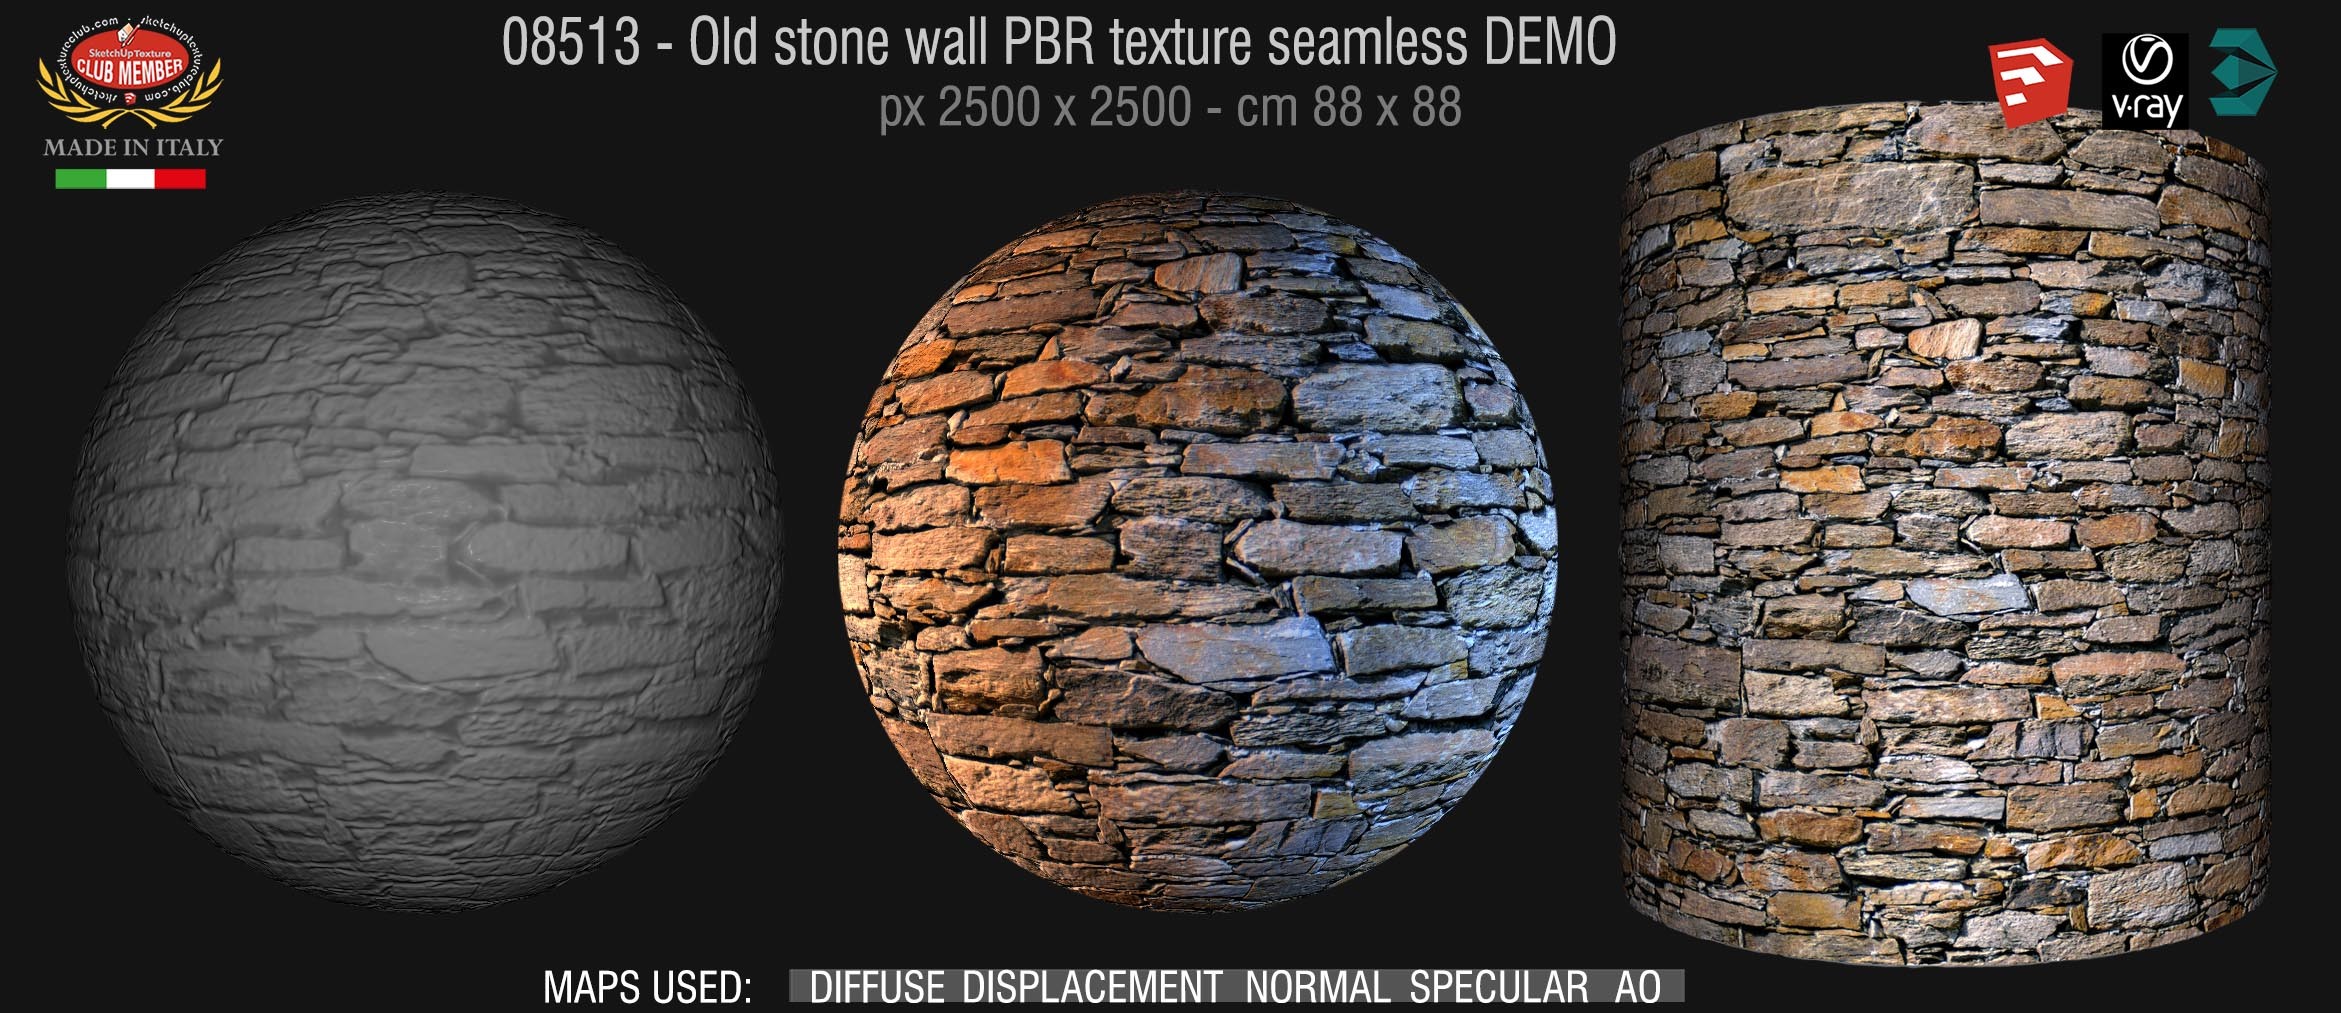 08513 Old stone wall PBR texture seamless DEMO